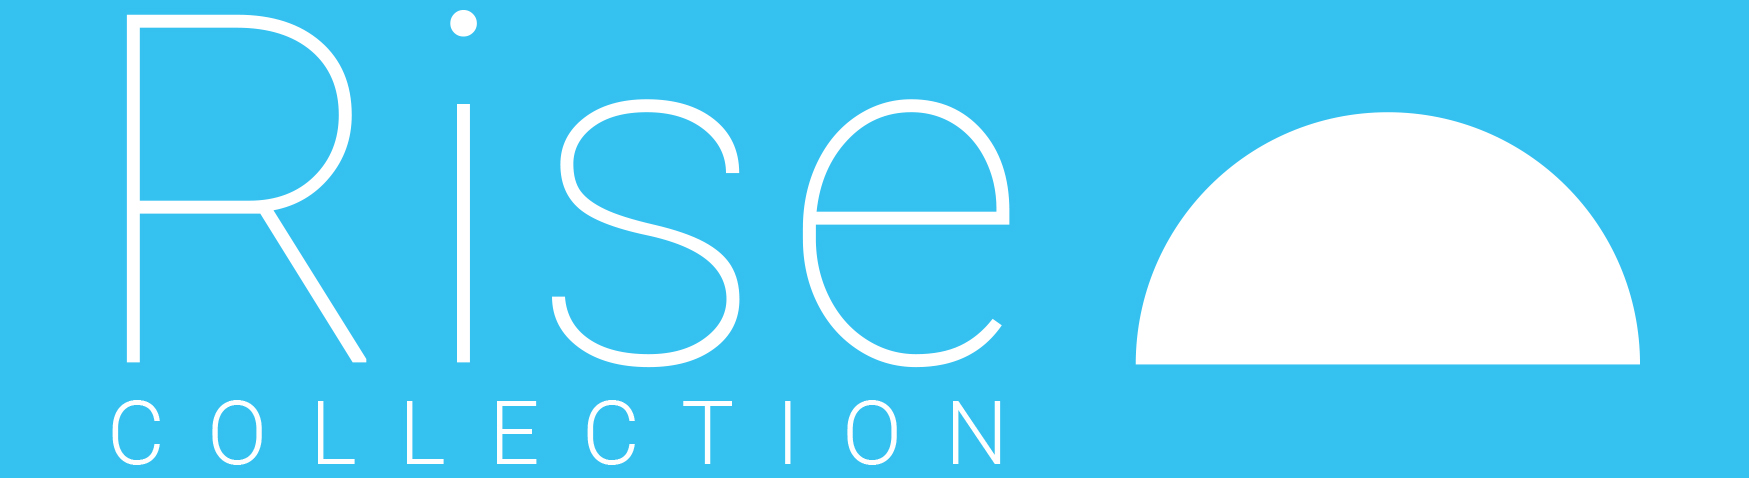 rise collection logo